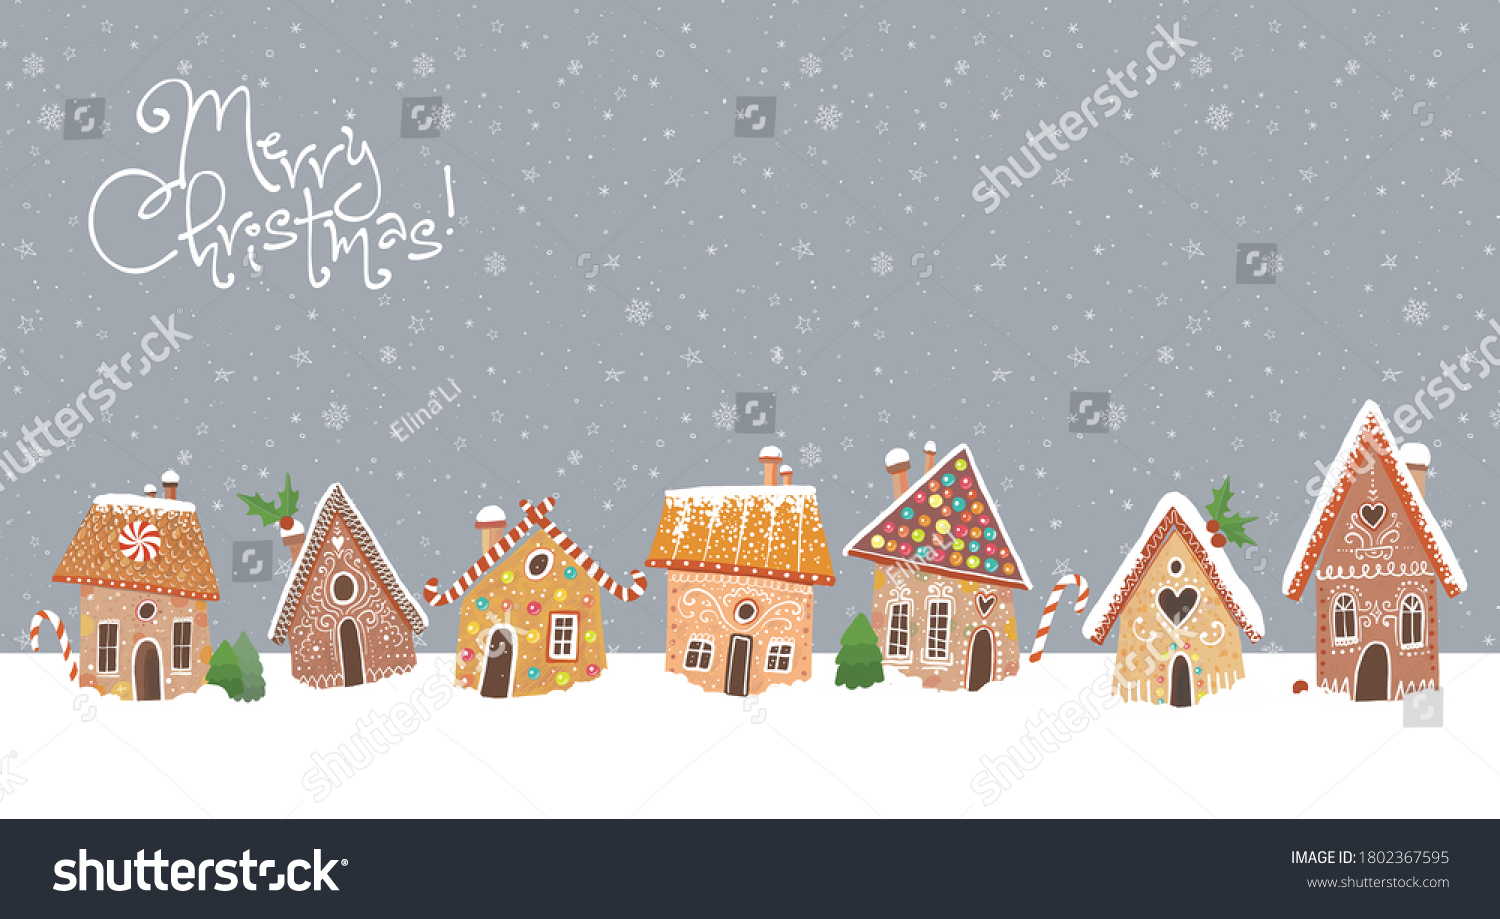 Christmas greeting card with cute gingerbread houses. #1802367595